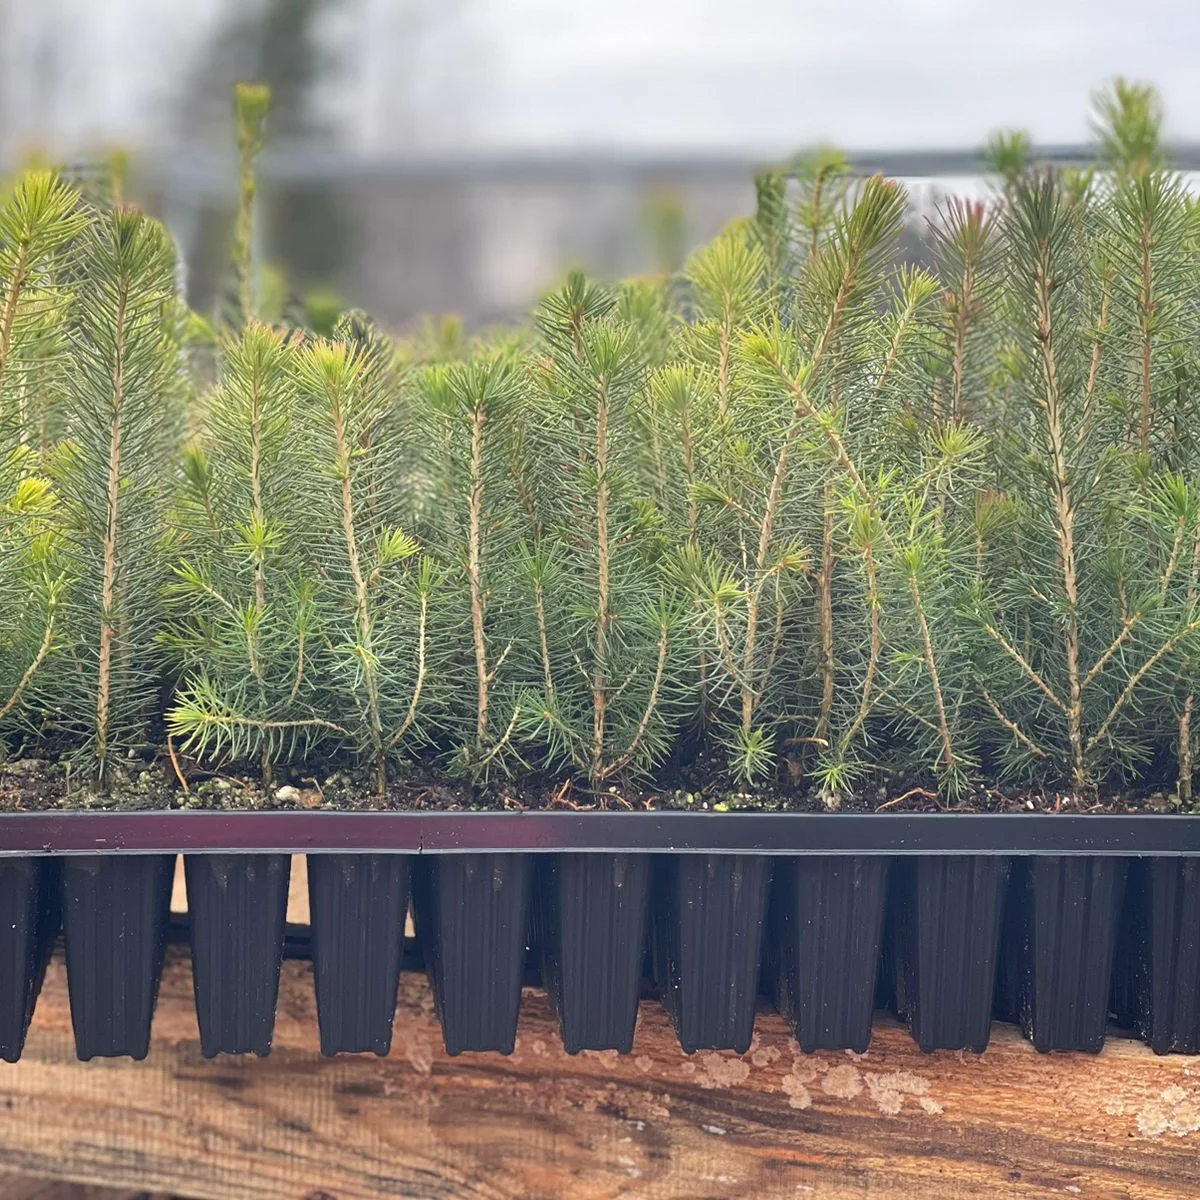 Seedlings of European spruce with a closed root system (ZKS)